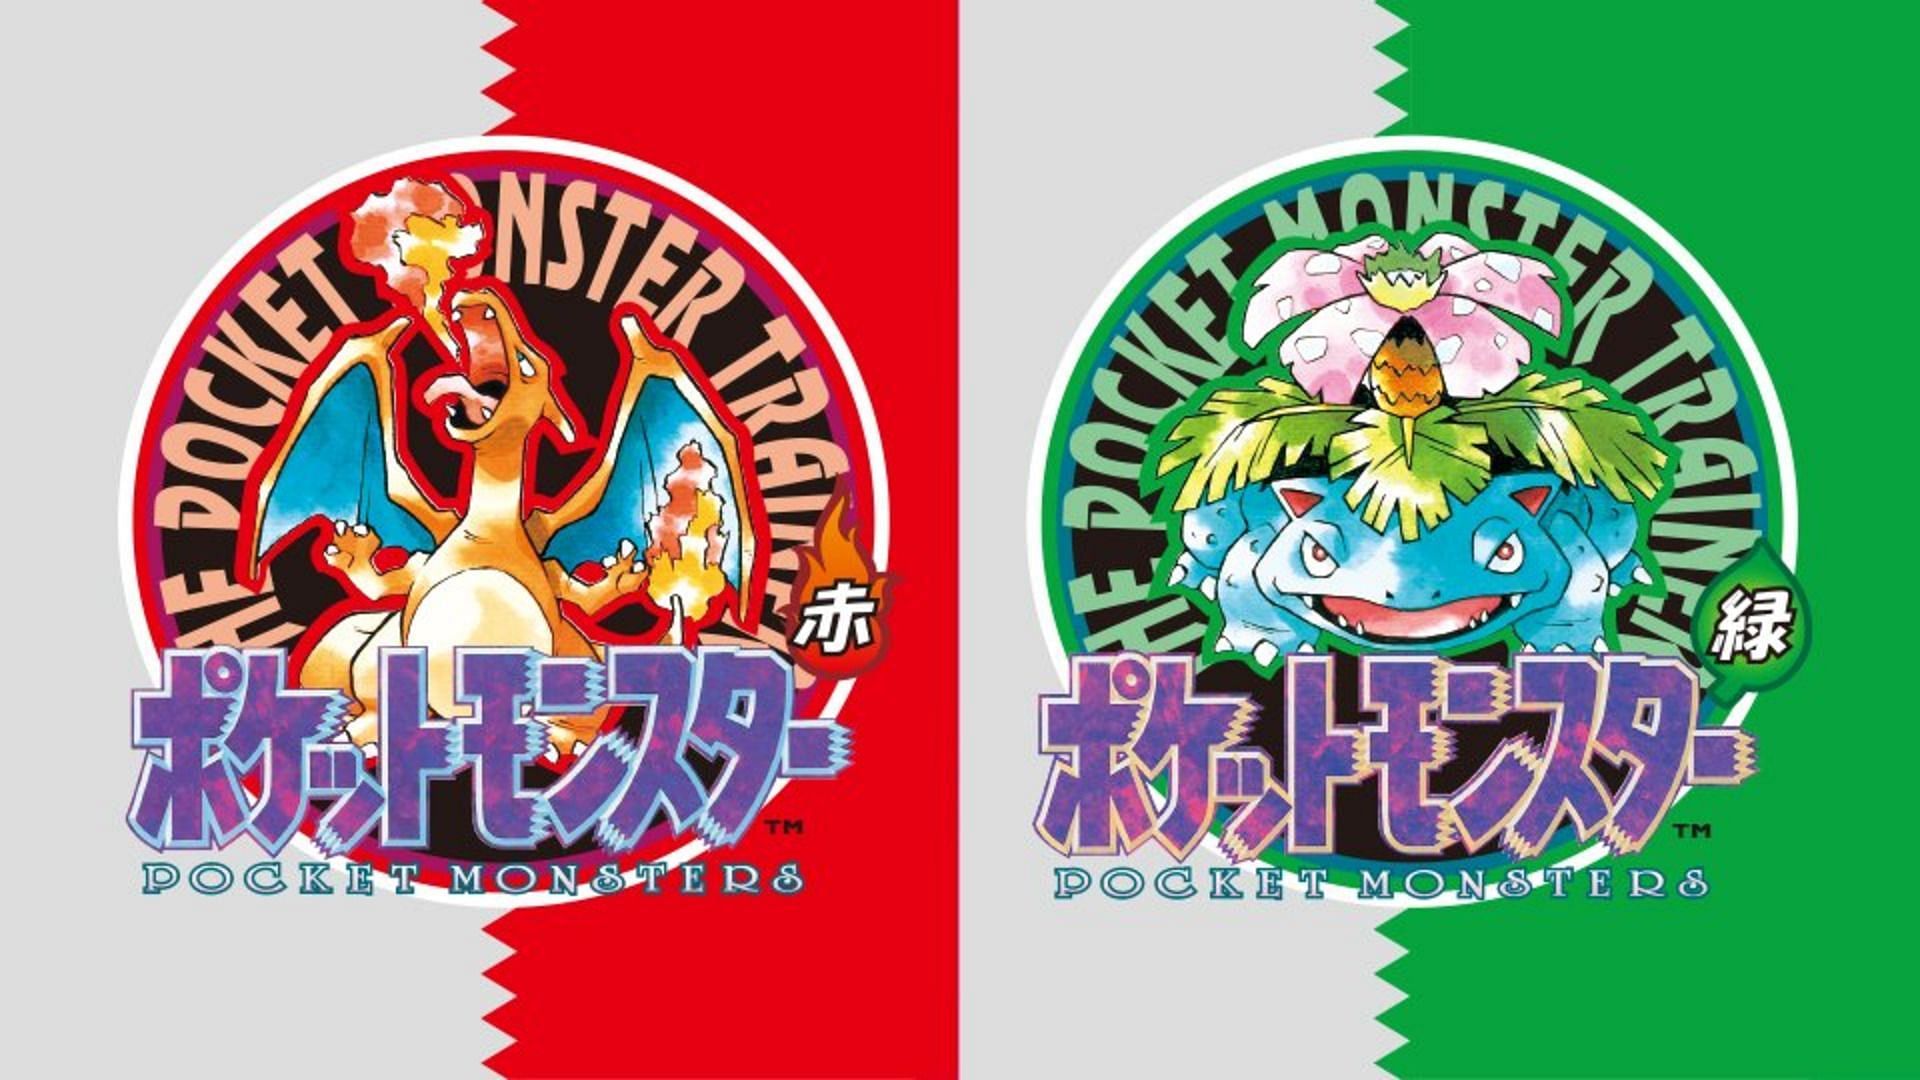 The original releases of the Kanto region were Red and Green exclusive to Japan (Image via The Pokemon Company)